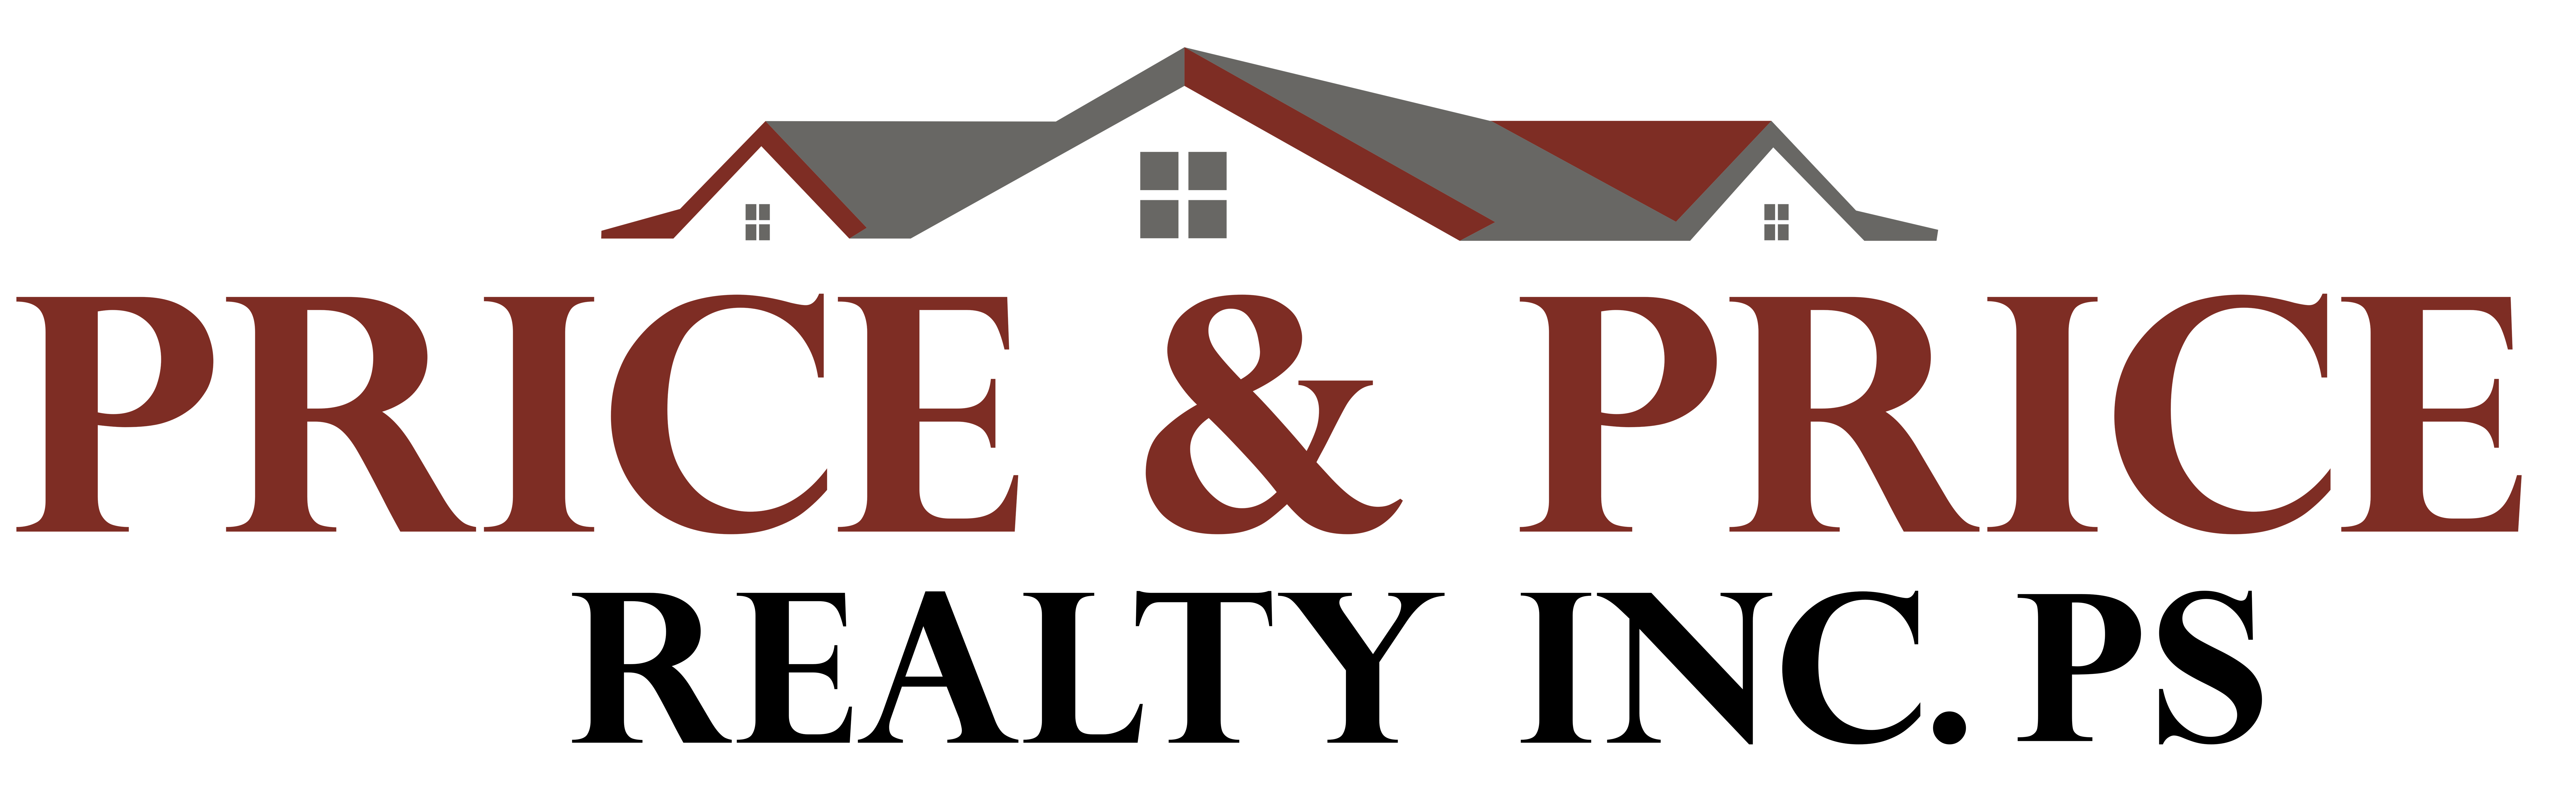 Price & Price Realty Inc. PS